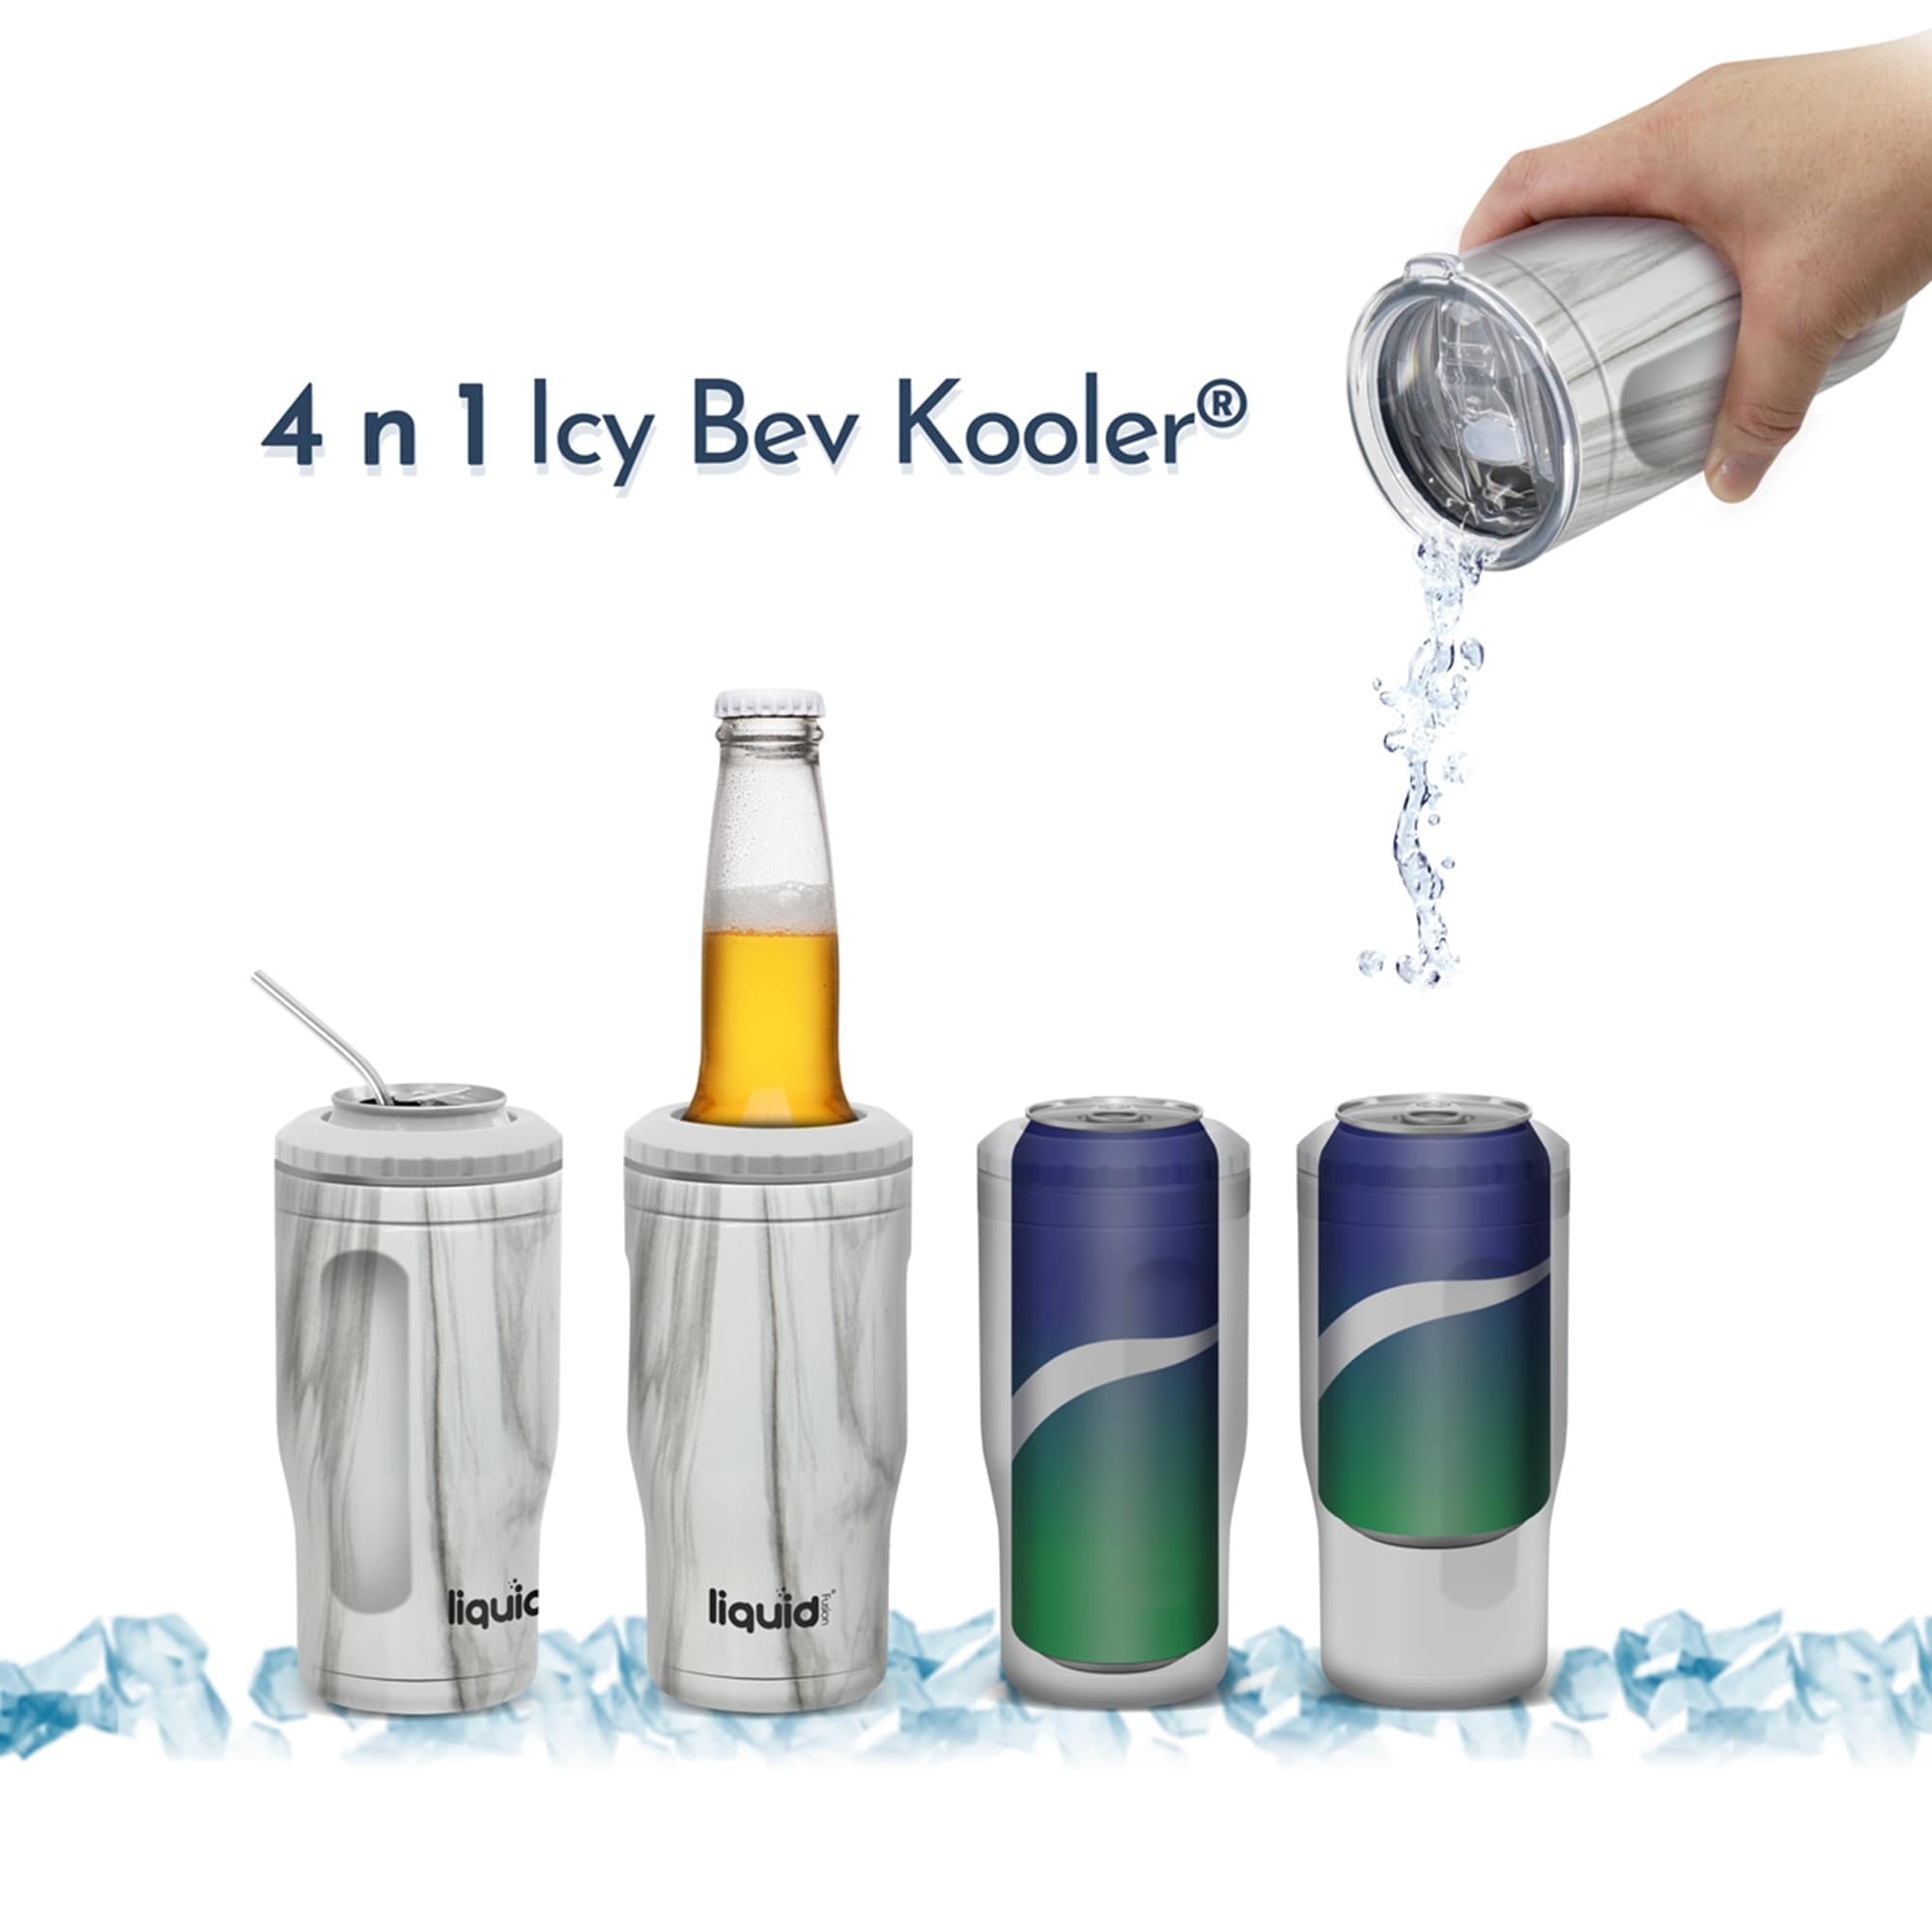 https://ak1.ostkcdn.com/images/products/is/images/direct/25e2bc12abb6e77bf13a7c3b3e49ddd51f482122/Grand-Fusion-4-n-1-Icy-Bev-Kooler%2C-Stainless-Steel-Tumbler%2C-Can-Insulator%2C-Bottle-Insulator%2C-White-Marble.jpg